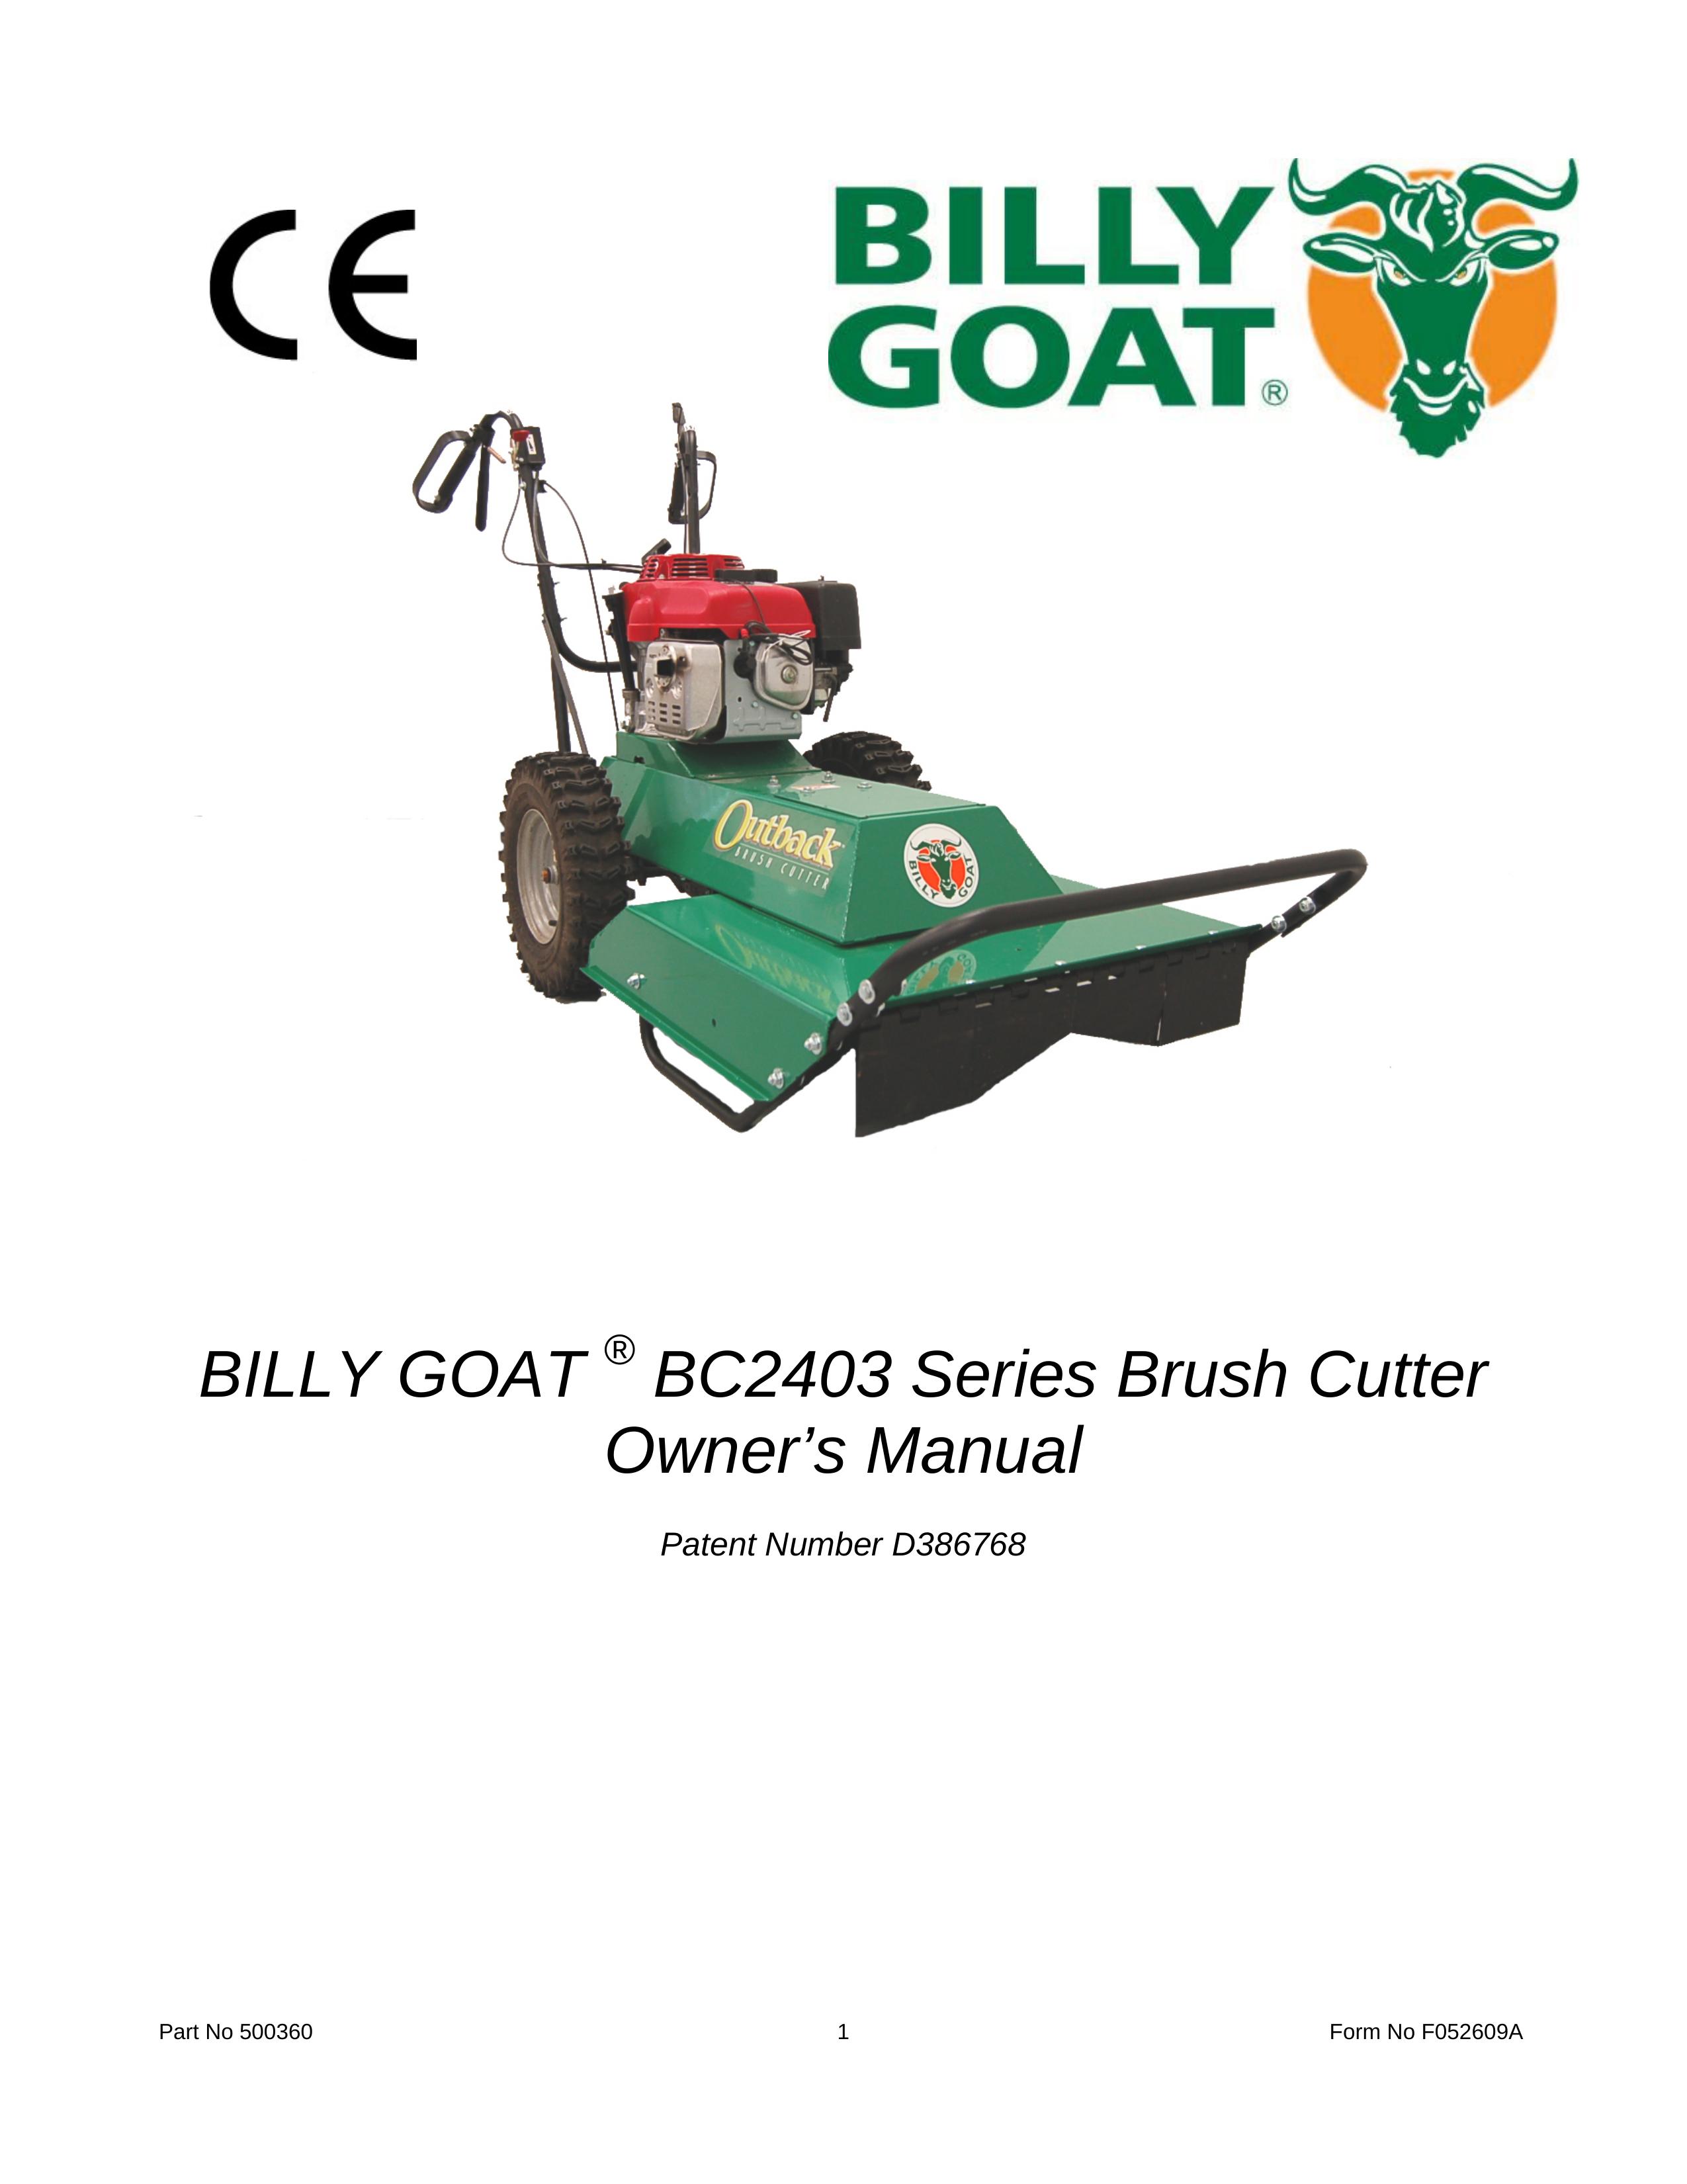 Billy Goat BC2403 Brush Cutter User Manual (Page 1)